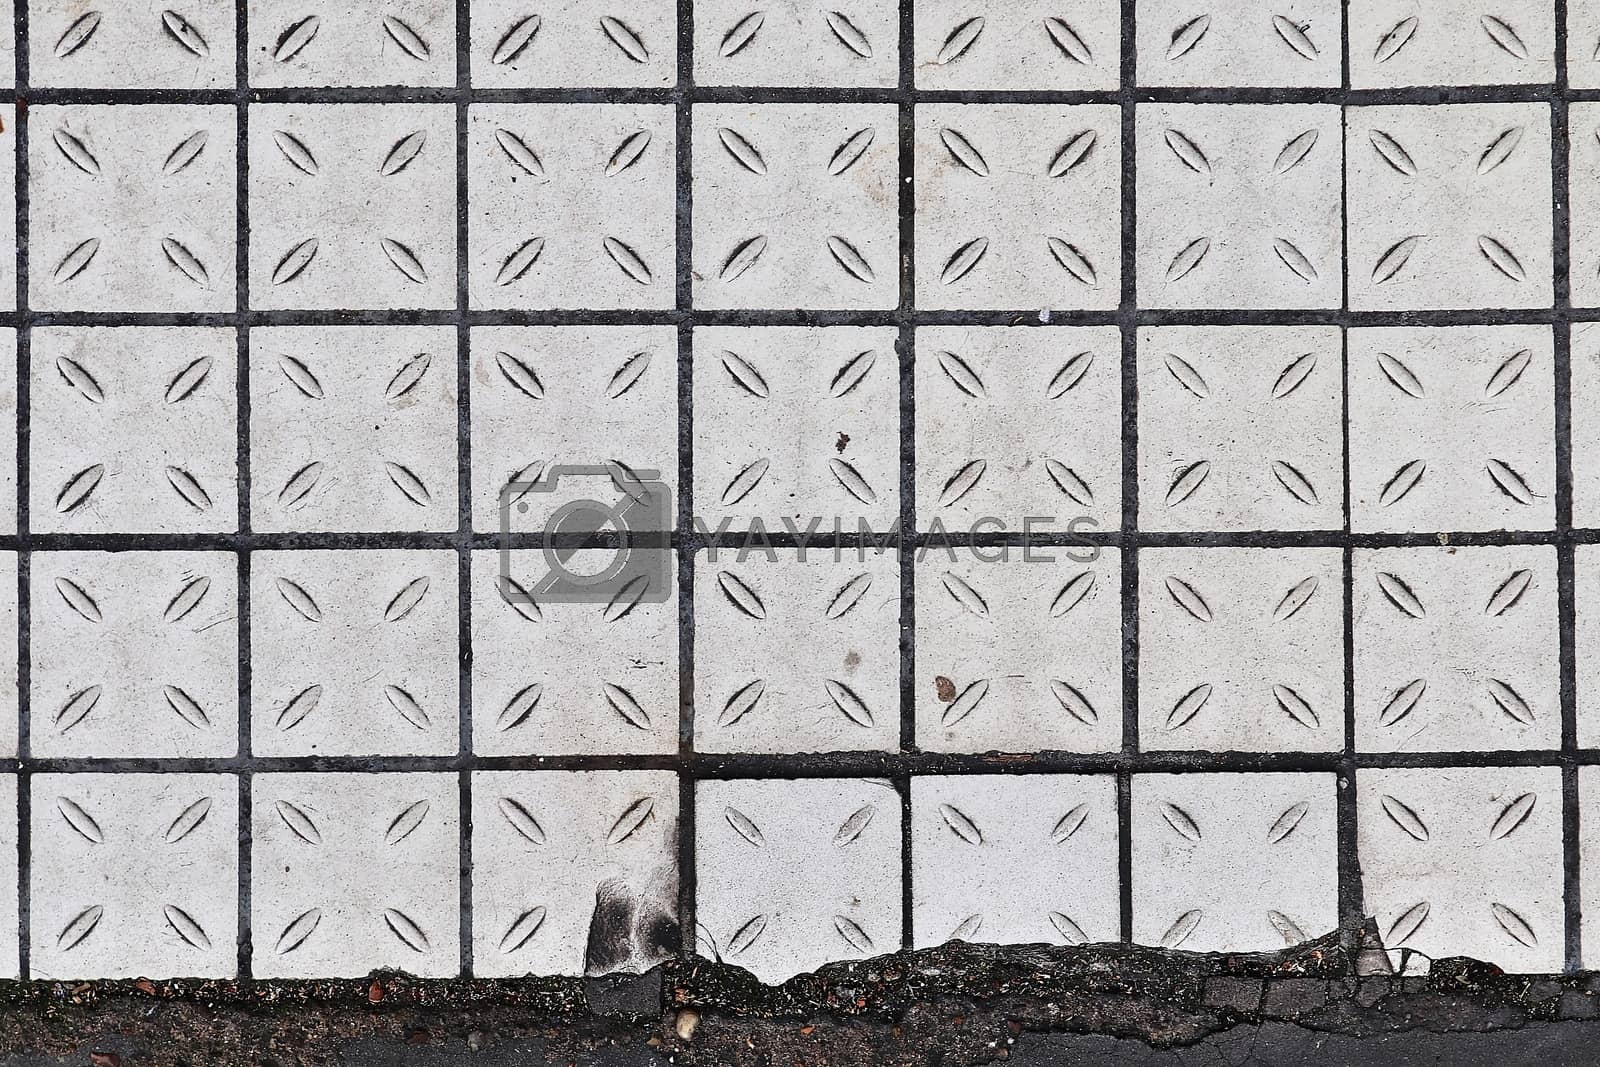 Royalty free image of Detailed close up texture on structured floor tiles on the groun by MP_foto71